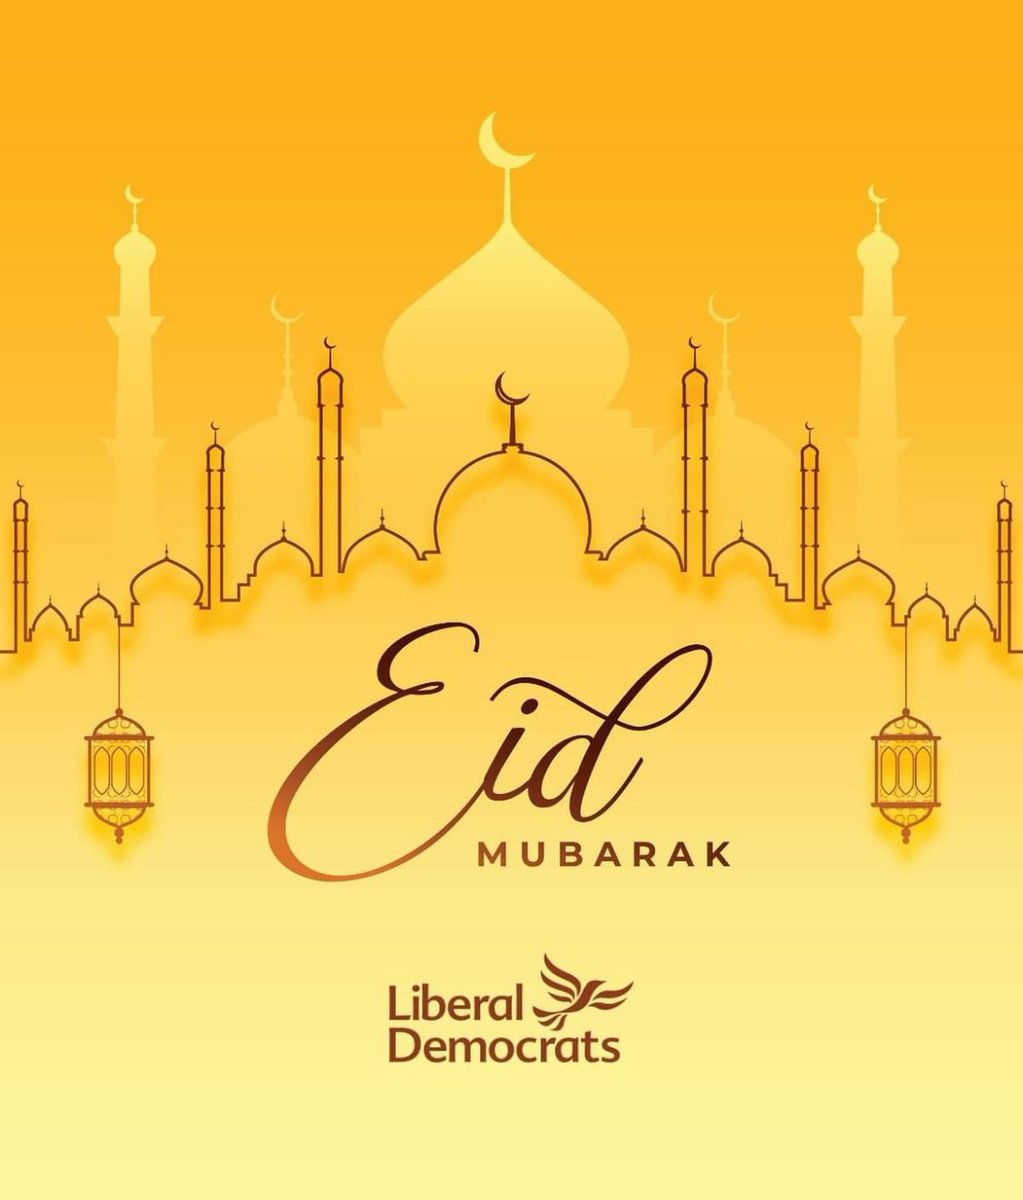 On behalf of Ealing Lib Dem Councillors and Focus teams, we wish #EidMubarak to all those celebrating this evening in Ealing.